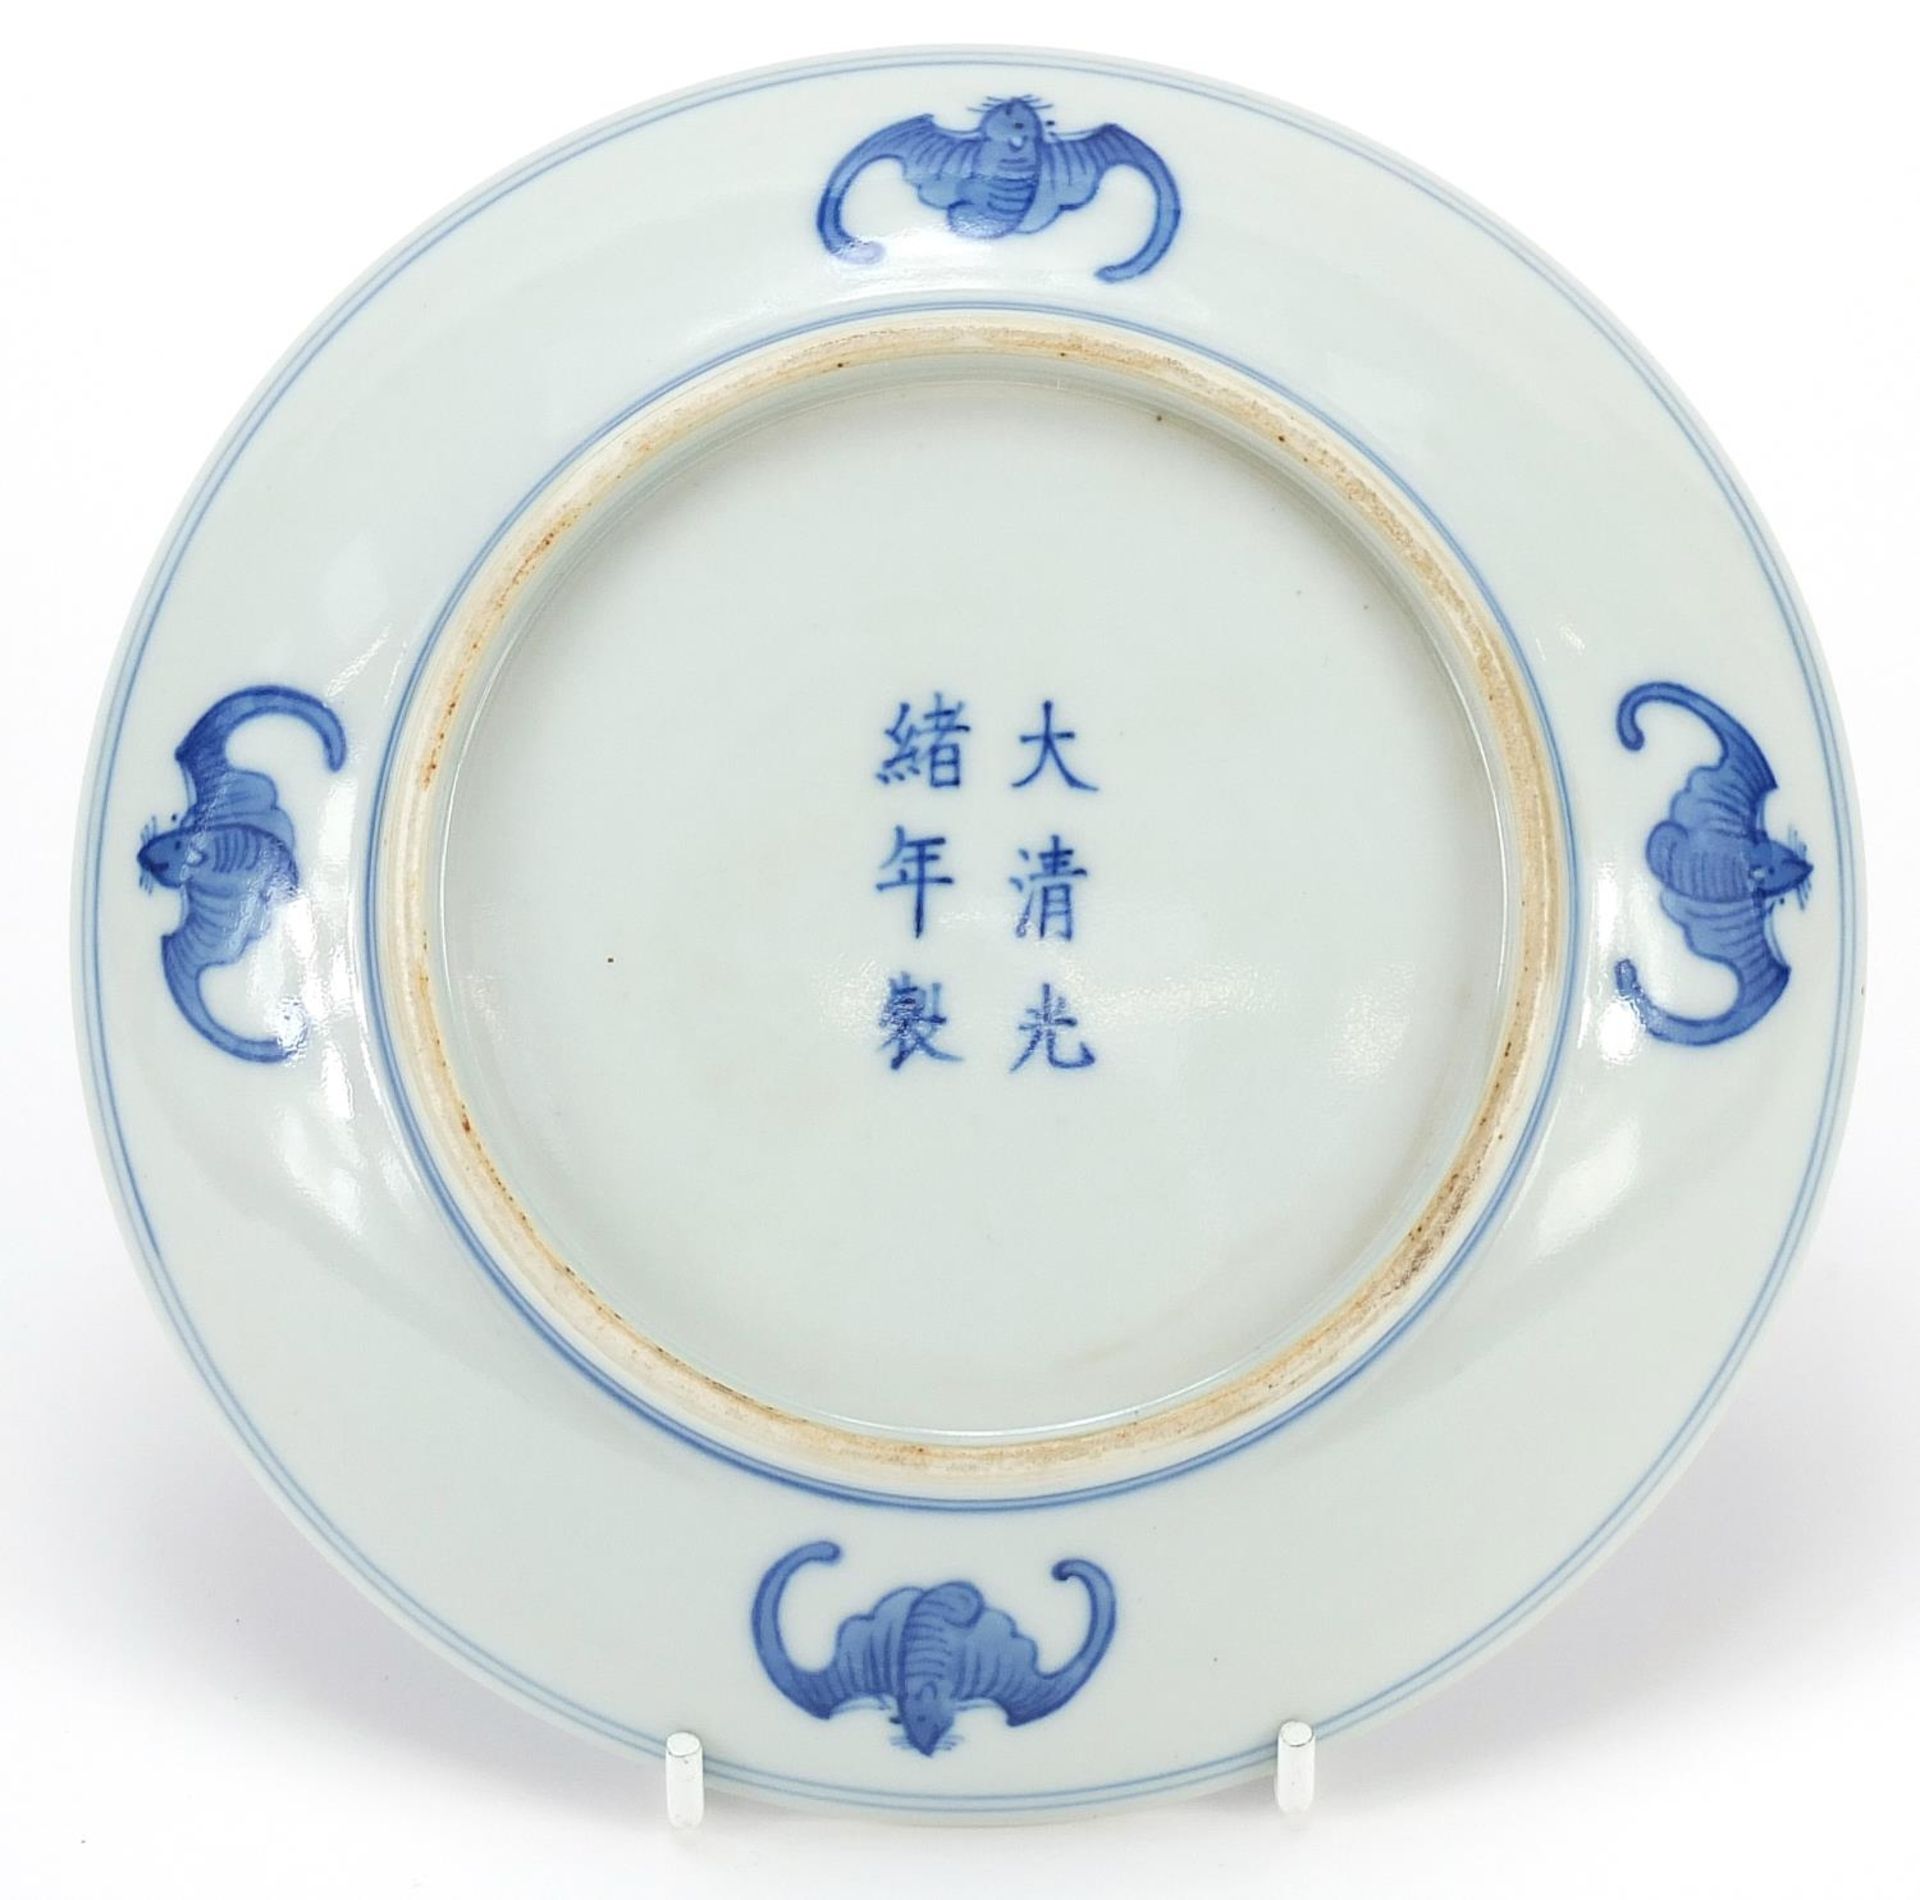 Chinese blue and white porcelain dish hand painted with bats amongst clouds, six figure character - Image 2 of 2